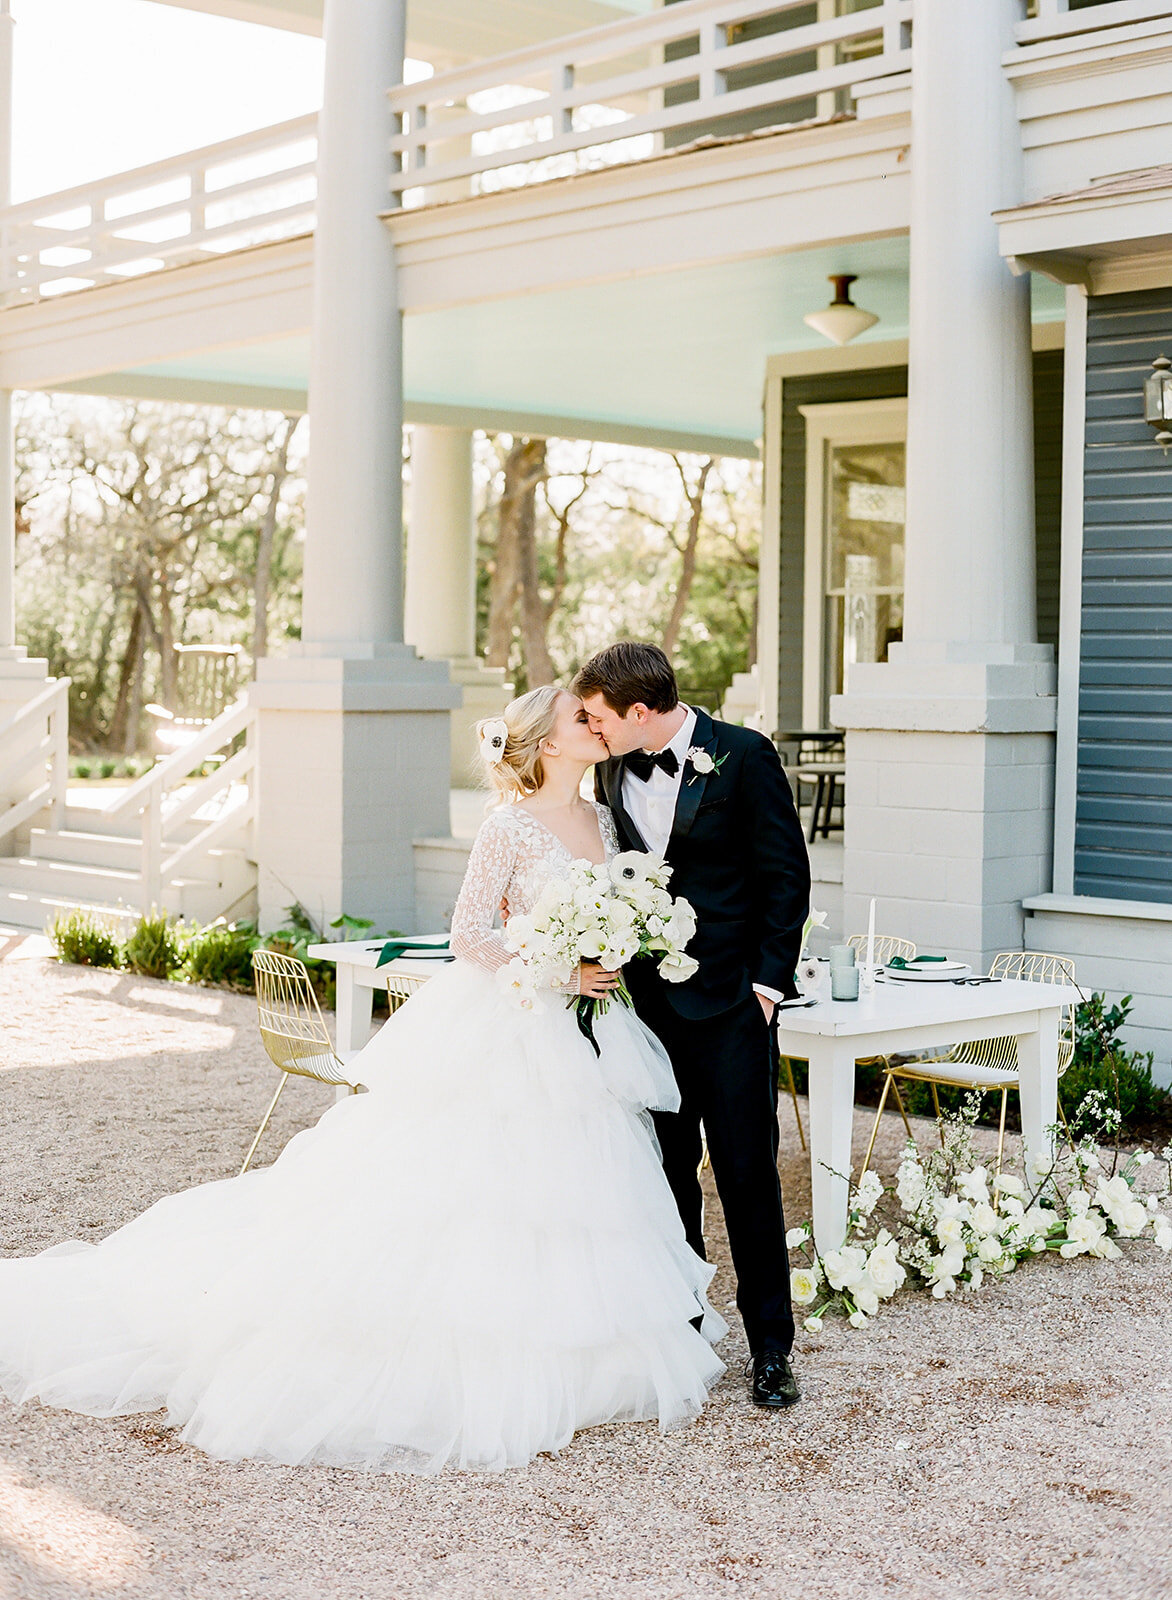 Texas Styled Shoot at the Grand Lady Austin Texas 26